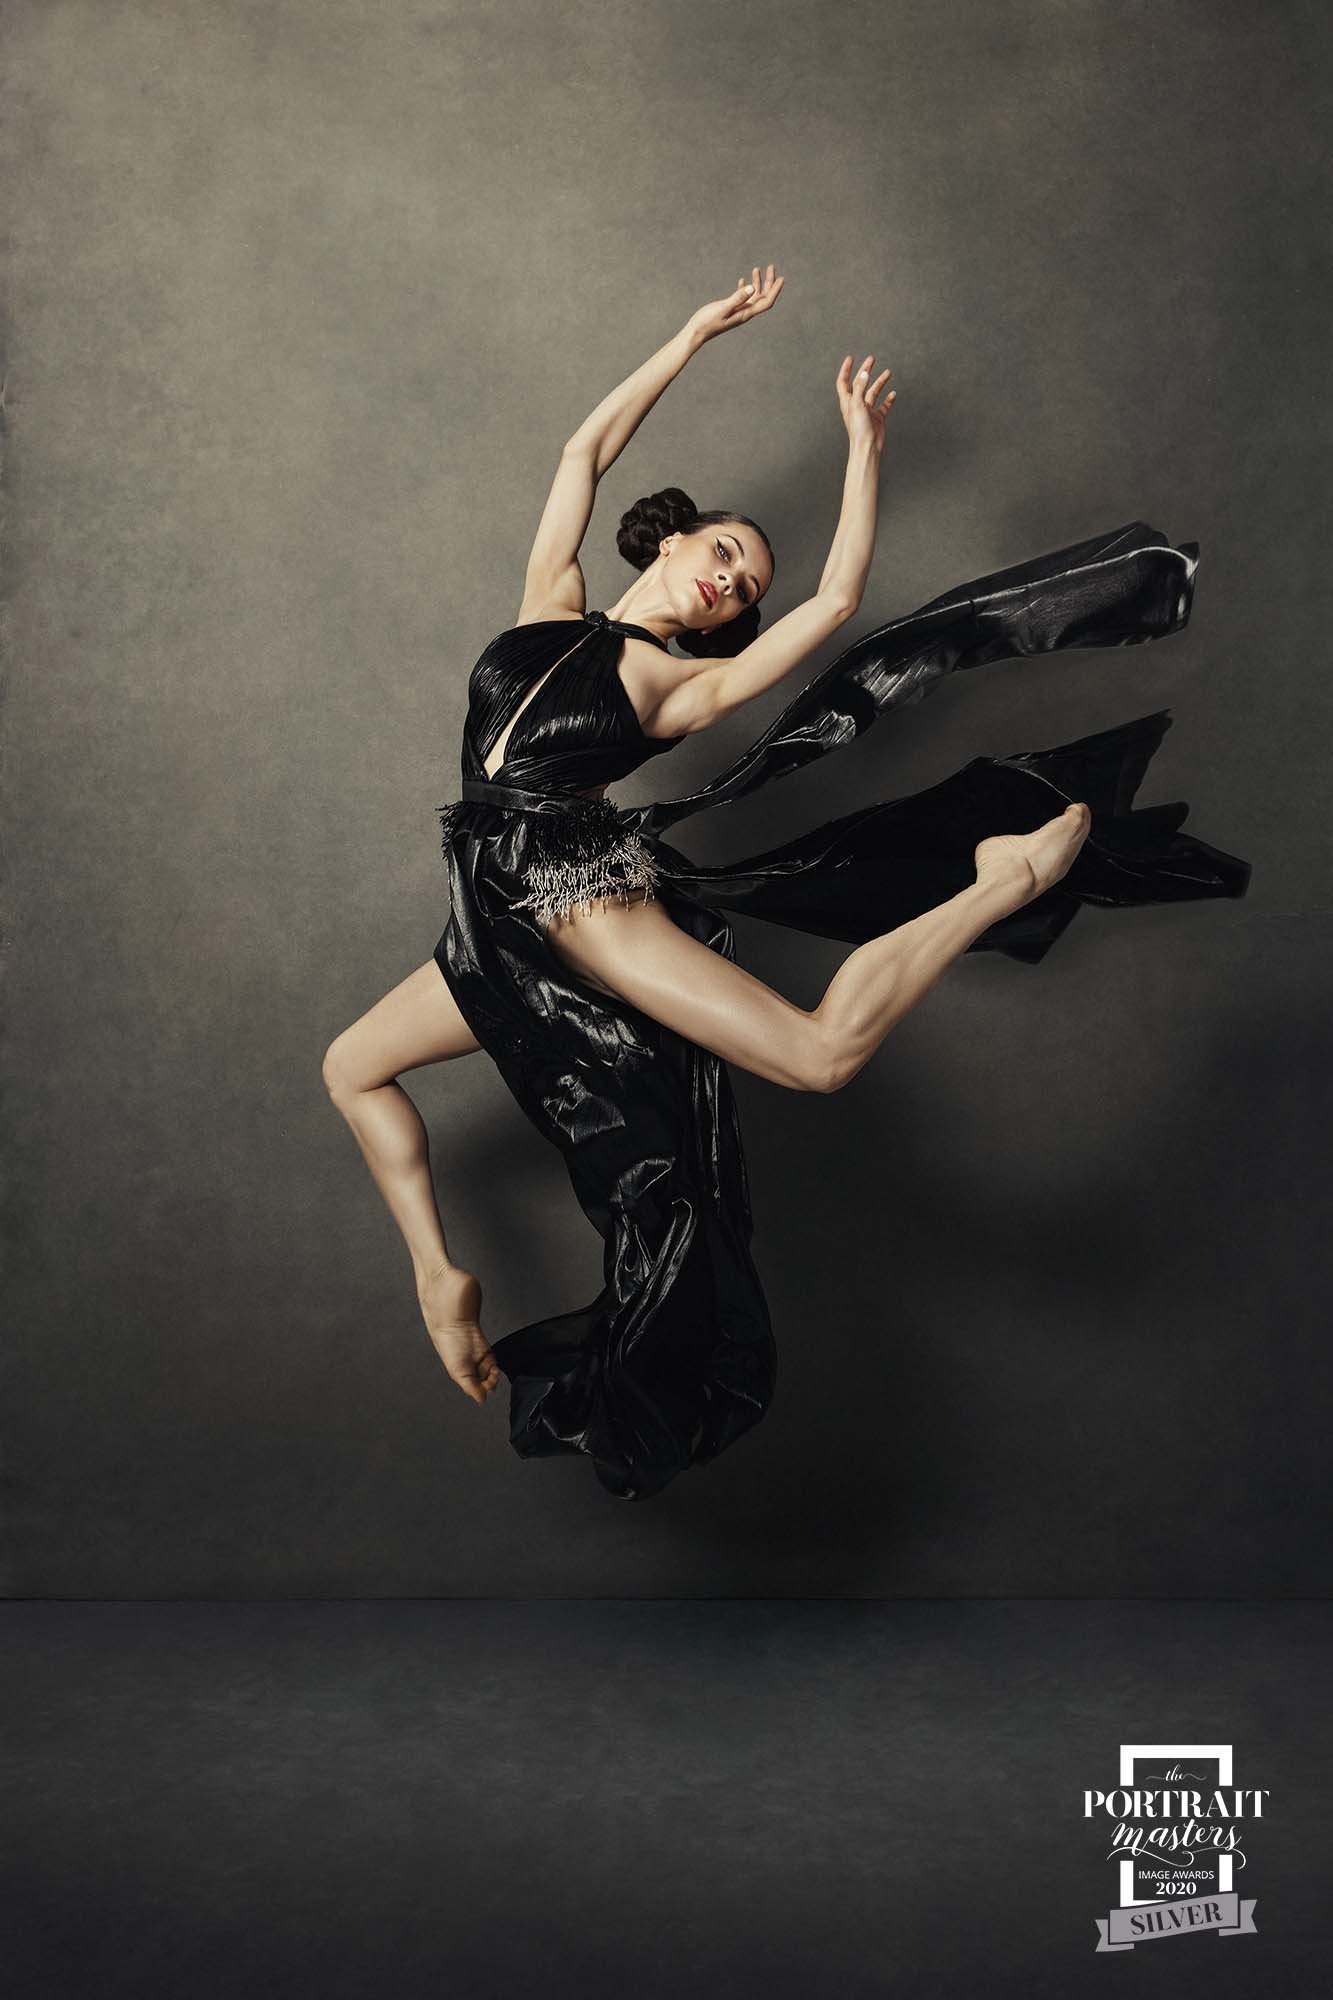 Woman jumping in the air flailing fabric during Motion Dance Portrait Session with Beauclair Photography